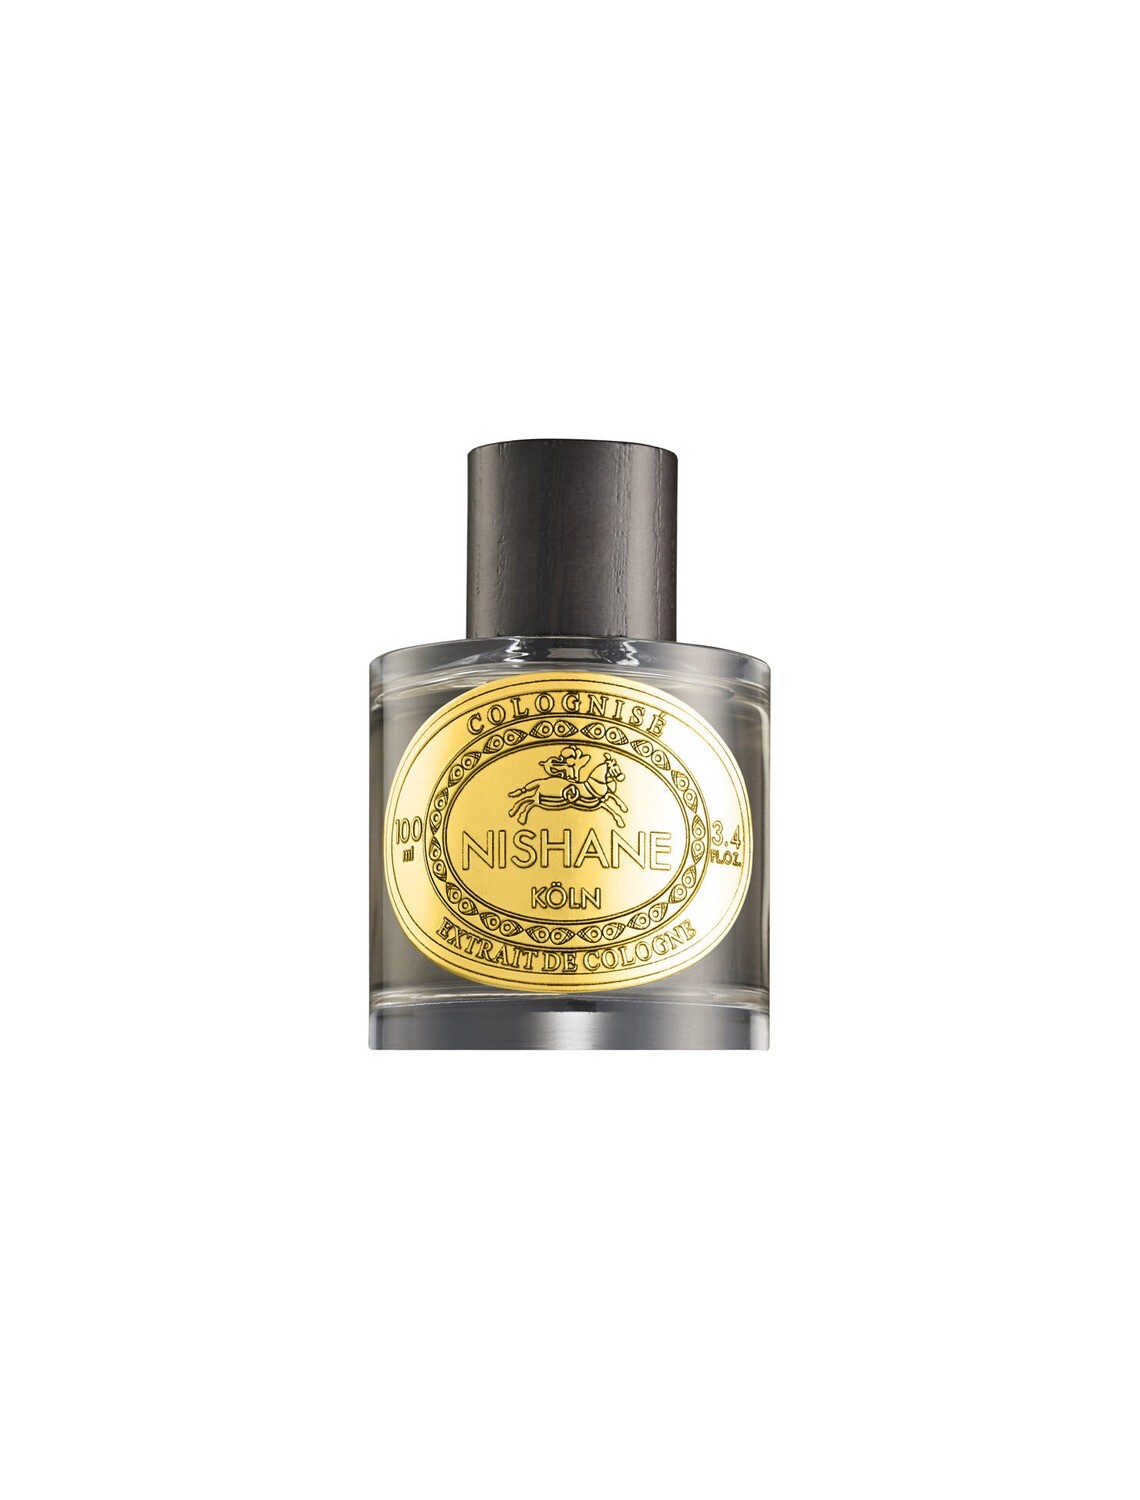 COLOGNISE' 100 ml edp